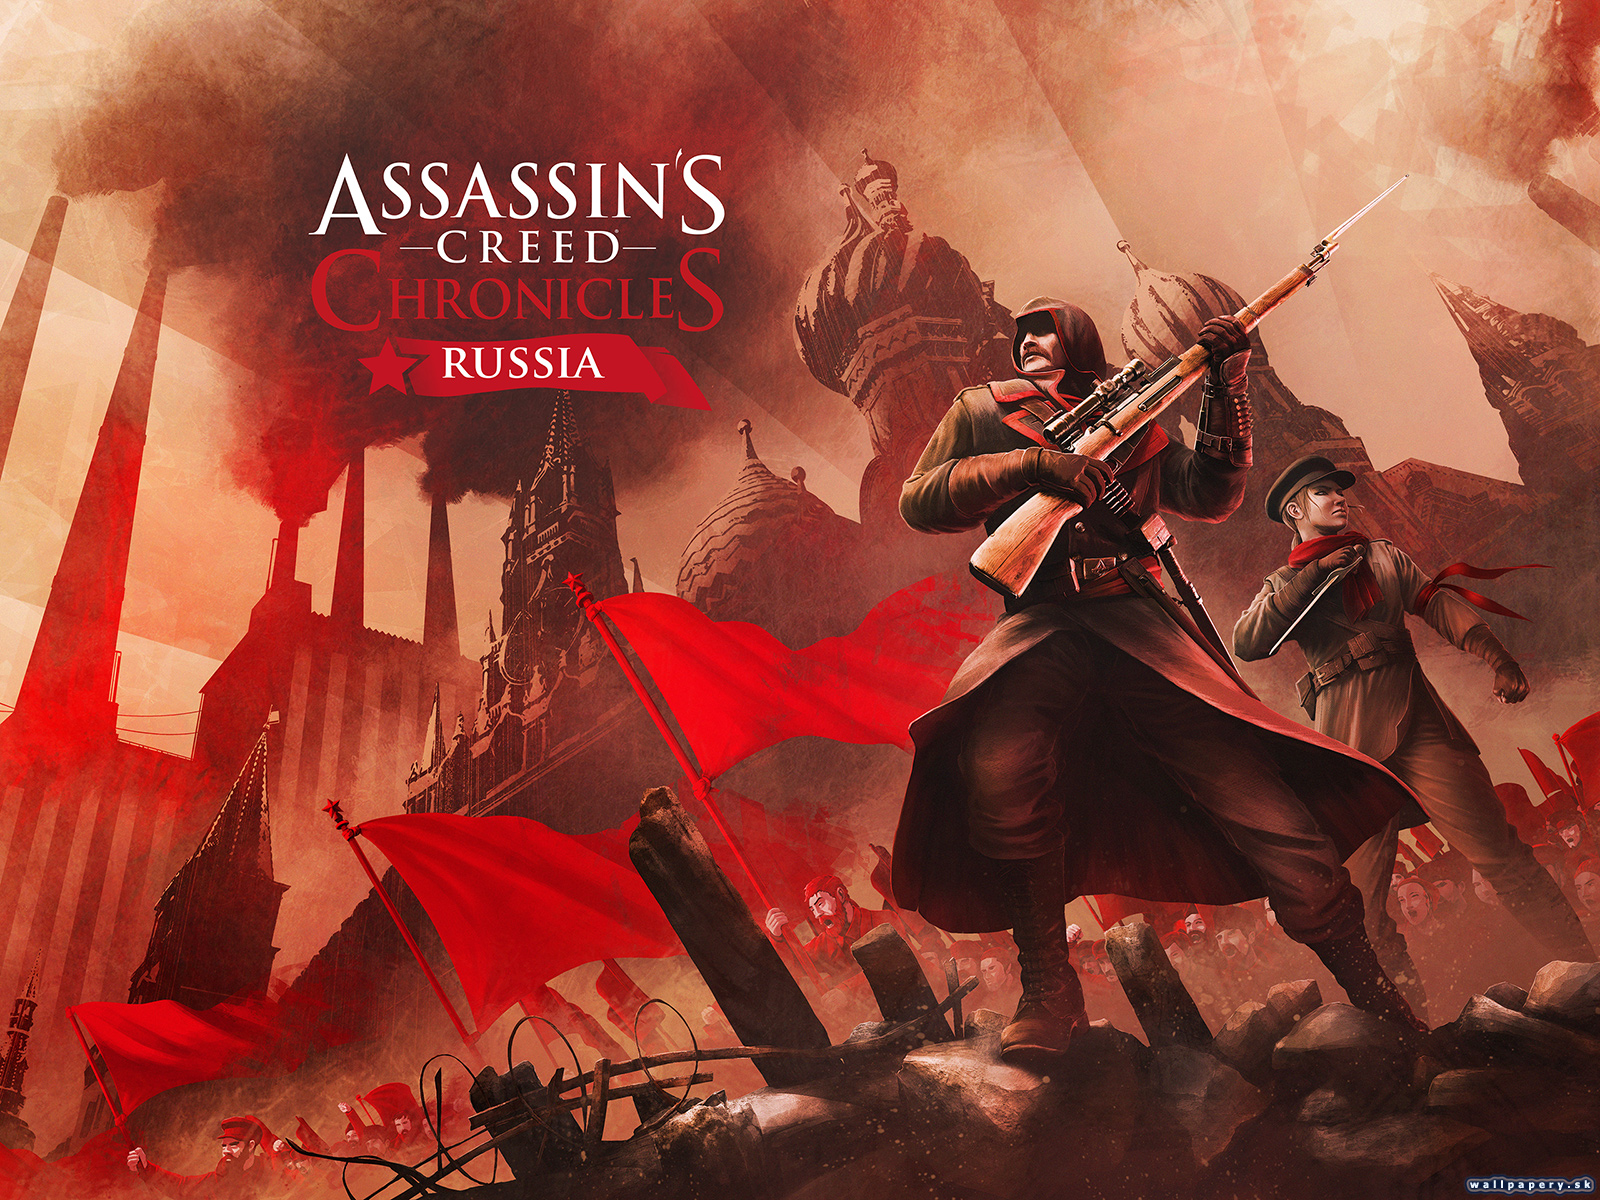 Assassin's Creed Chronicles: Russia - wallpaper 1